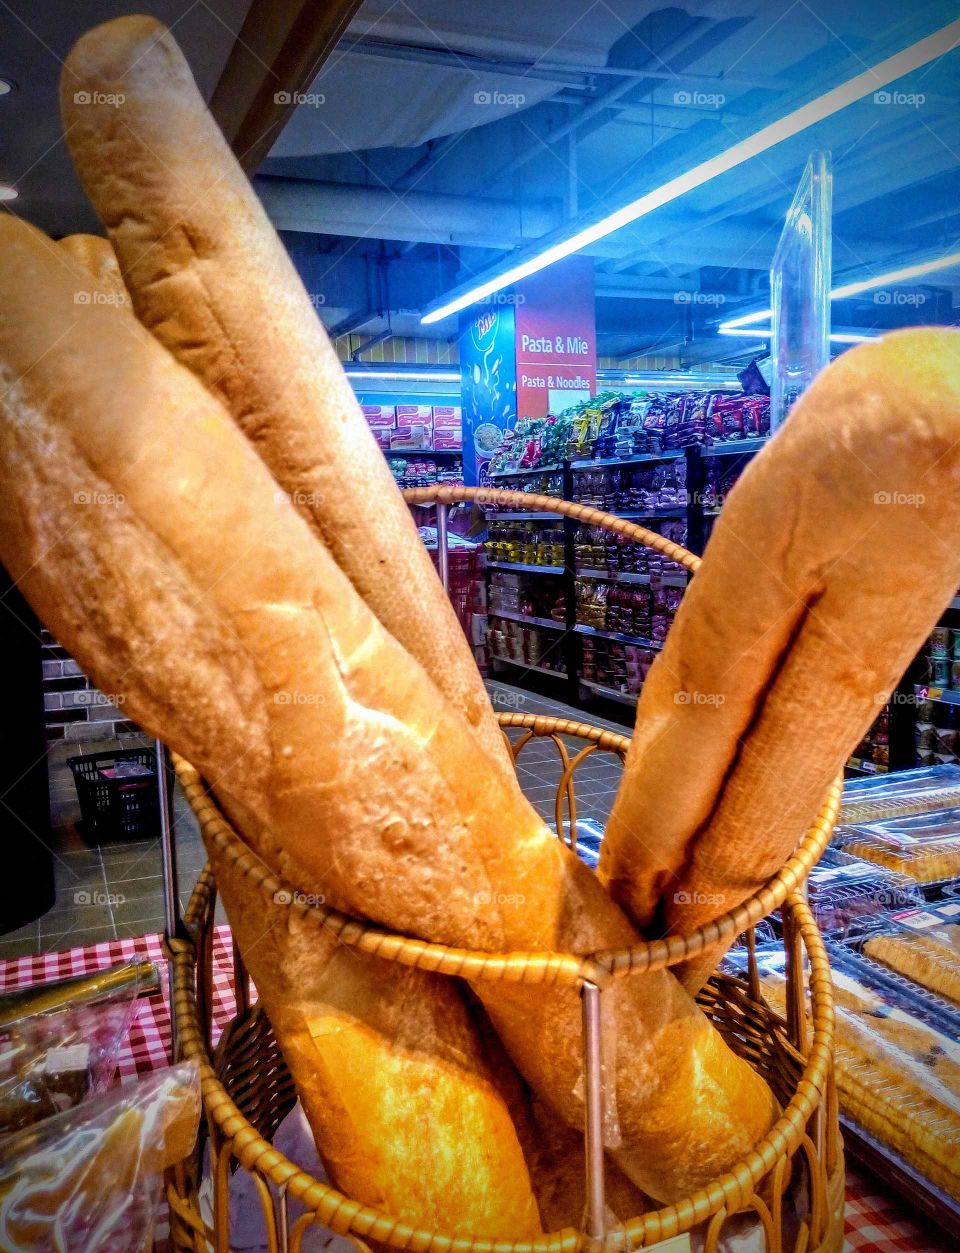 baguette found at local market, Hey don't only pass by, pick me up please